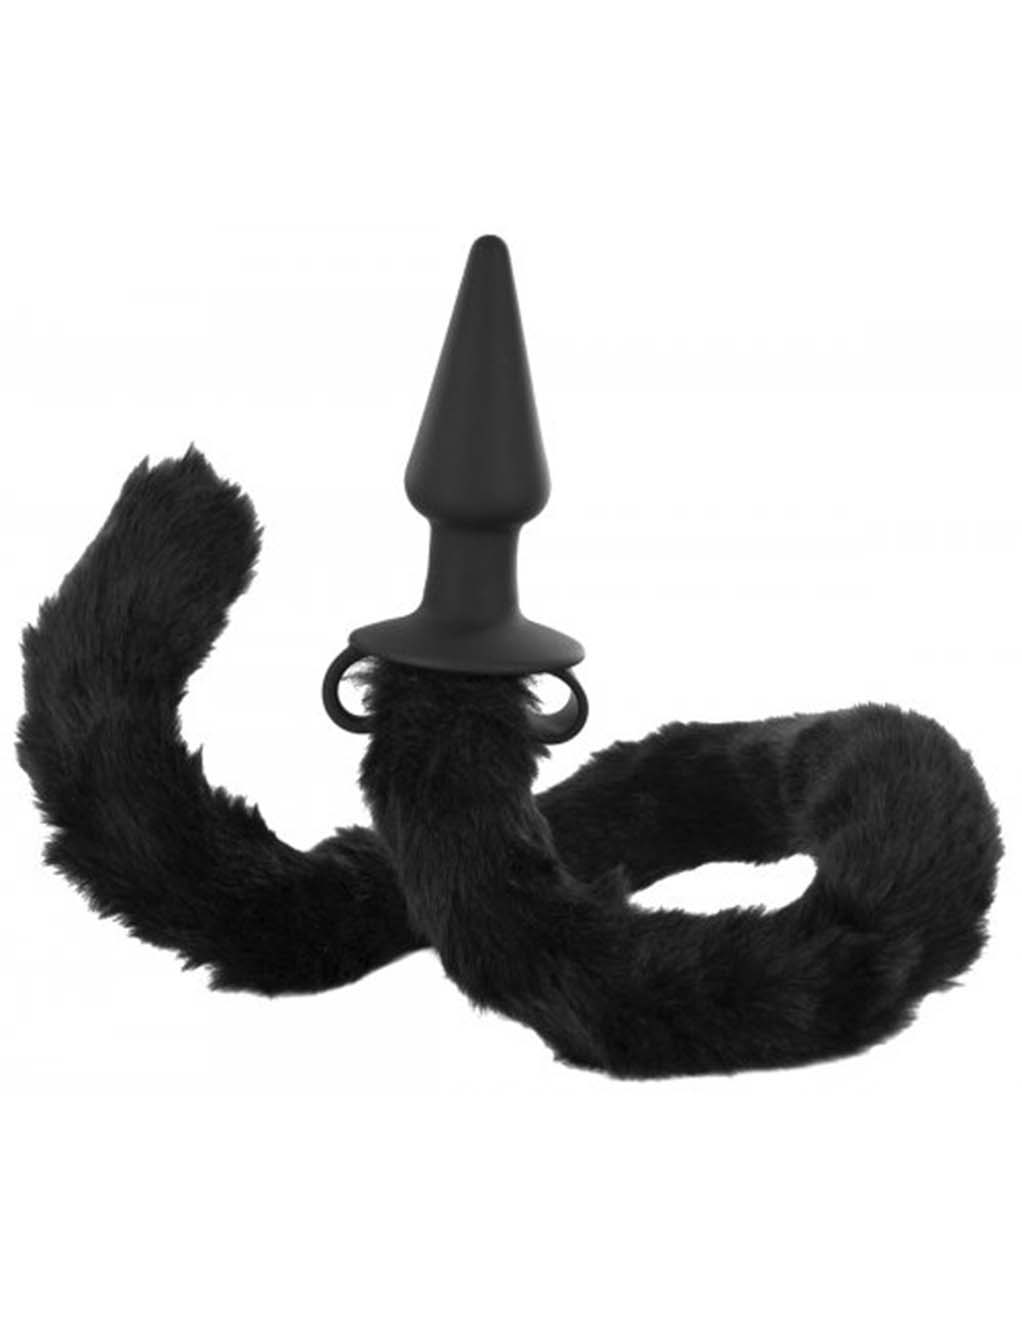 Tailz Bad Kitty Cat Tail Plug- Coiled